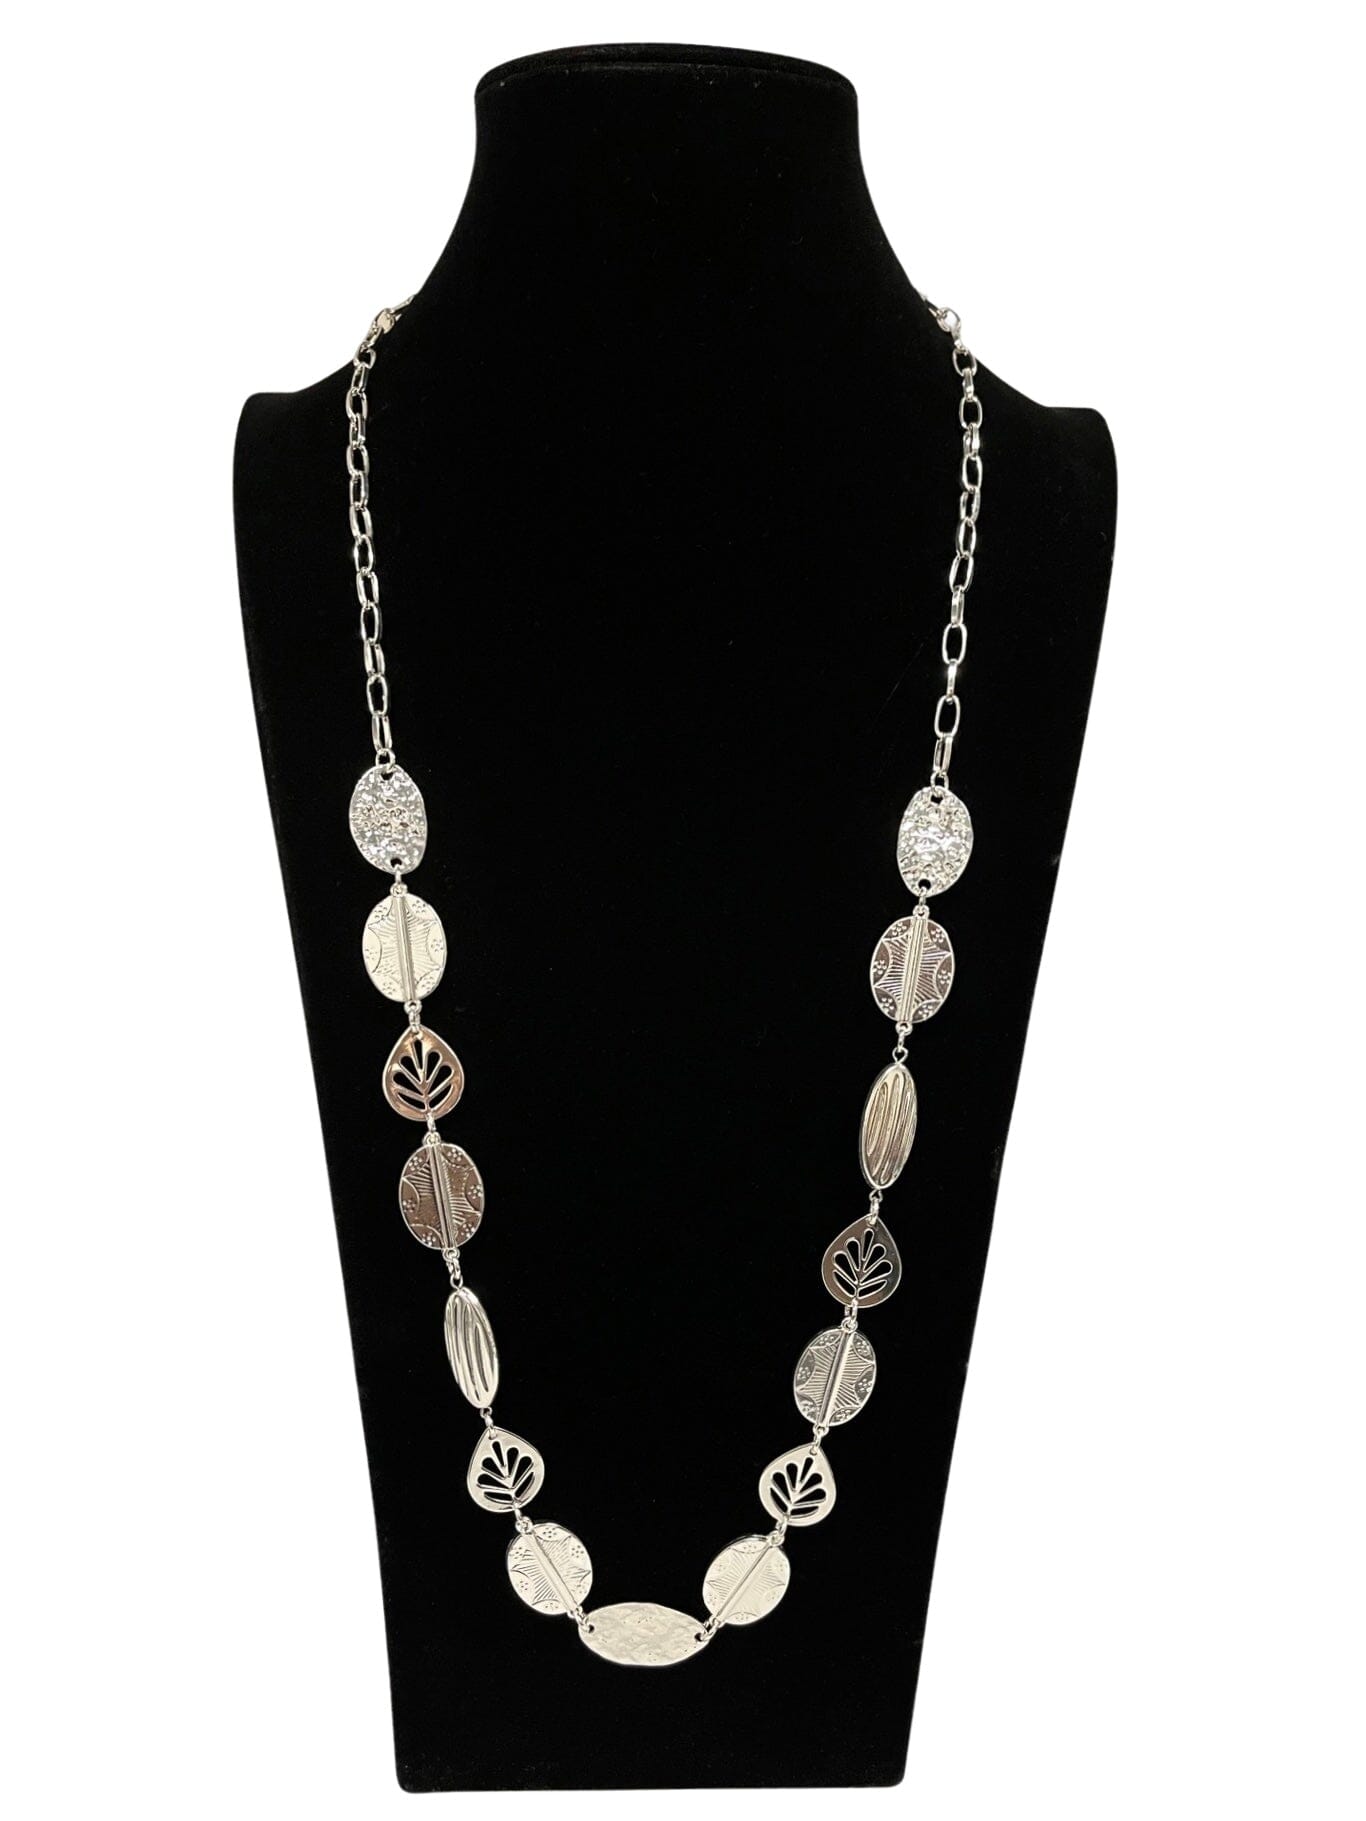 Silver Long Statement Necklace